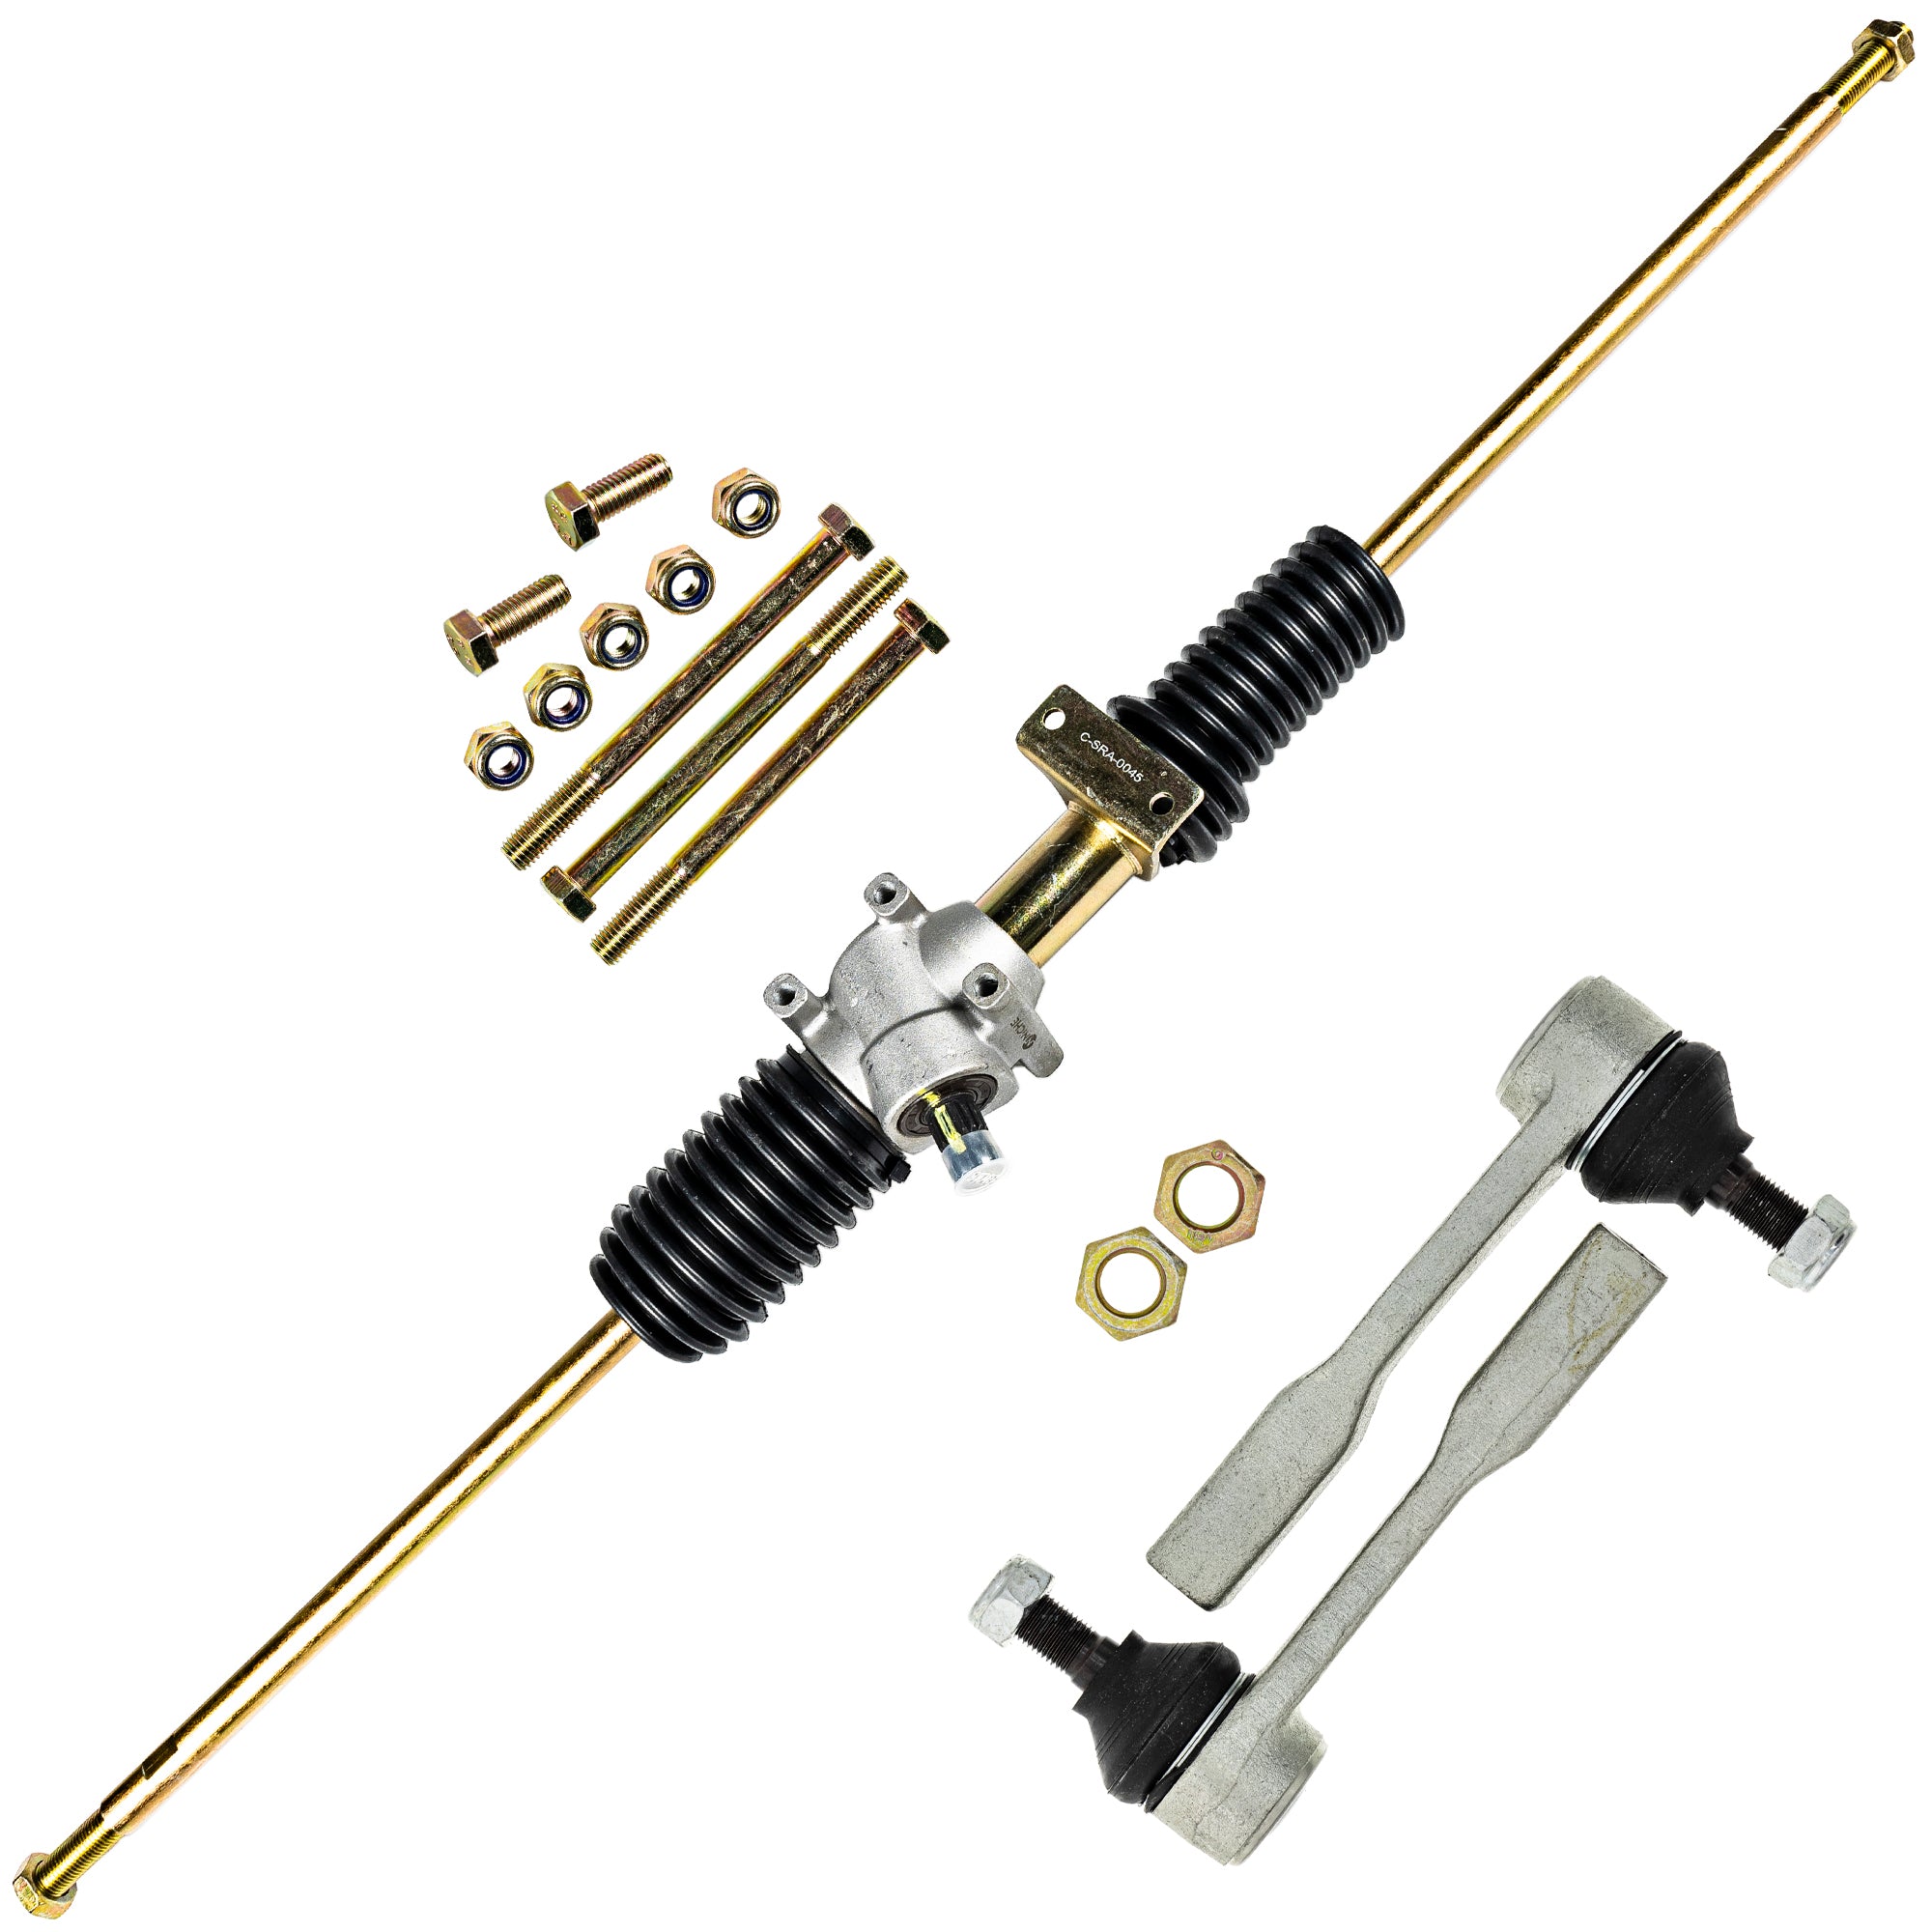 Steering Rack Assembly & Tie Rods Kit for zOTHER Polaris NICHE MK1009504